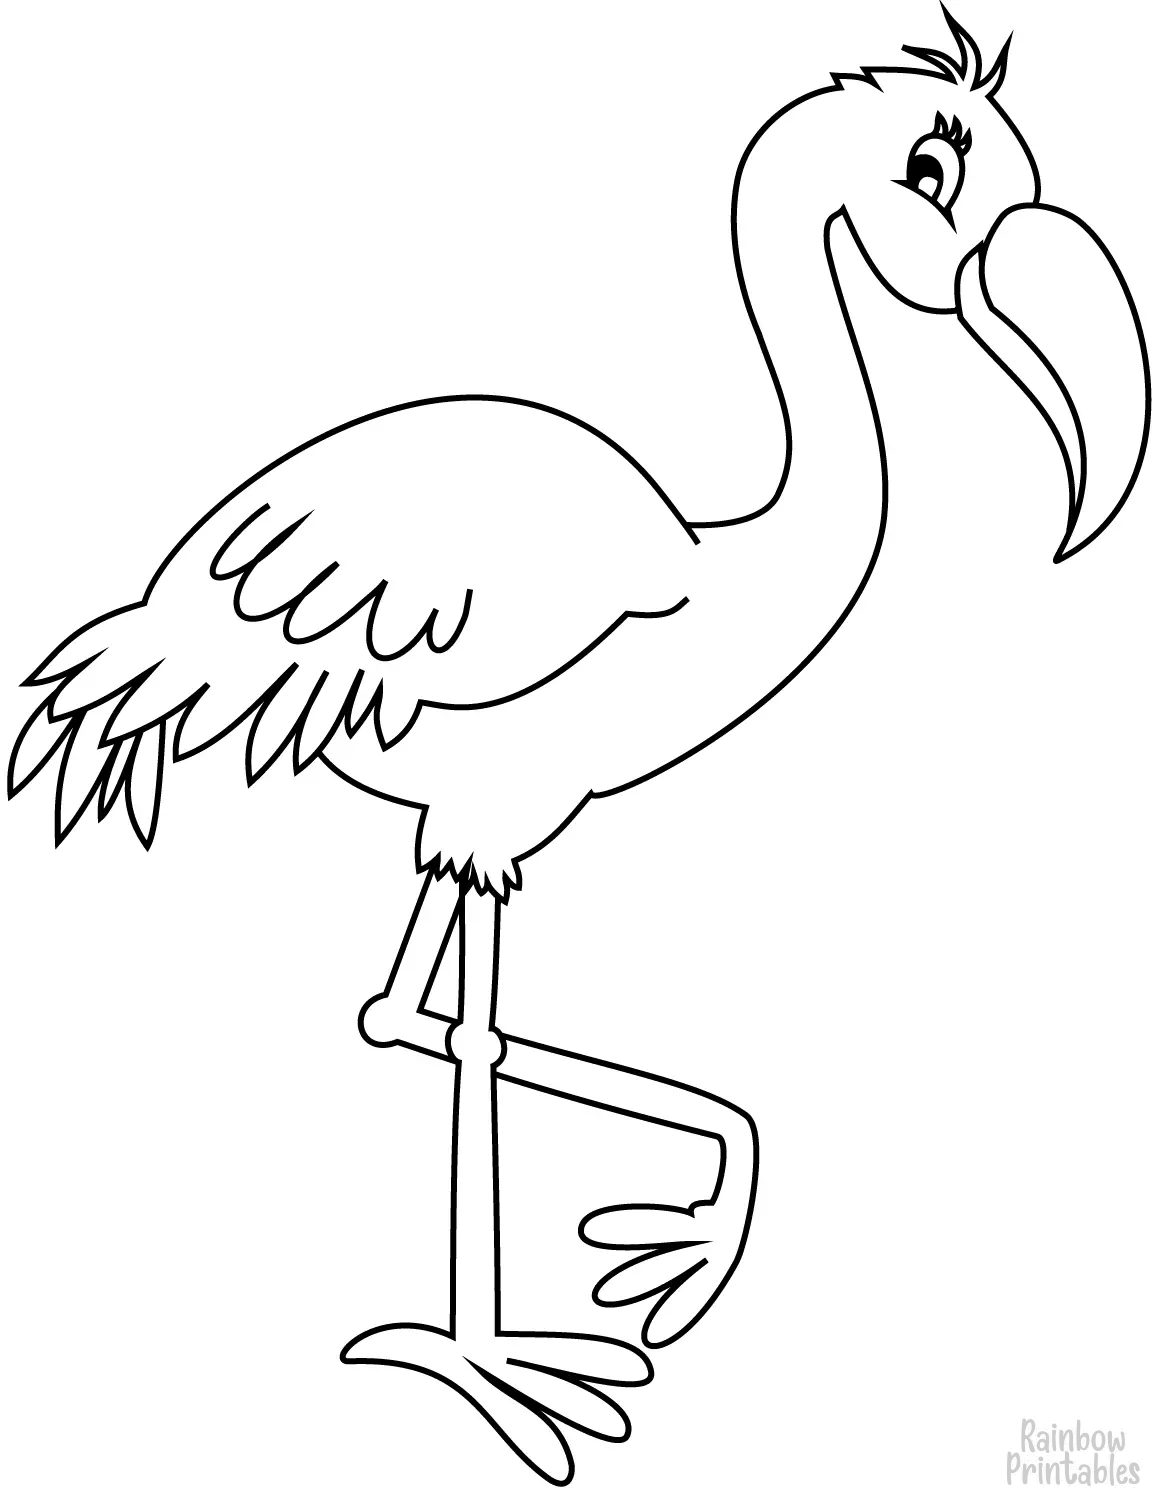 Easy-Simple-flamingo-coloring-page-activities-for-kids